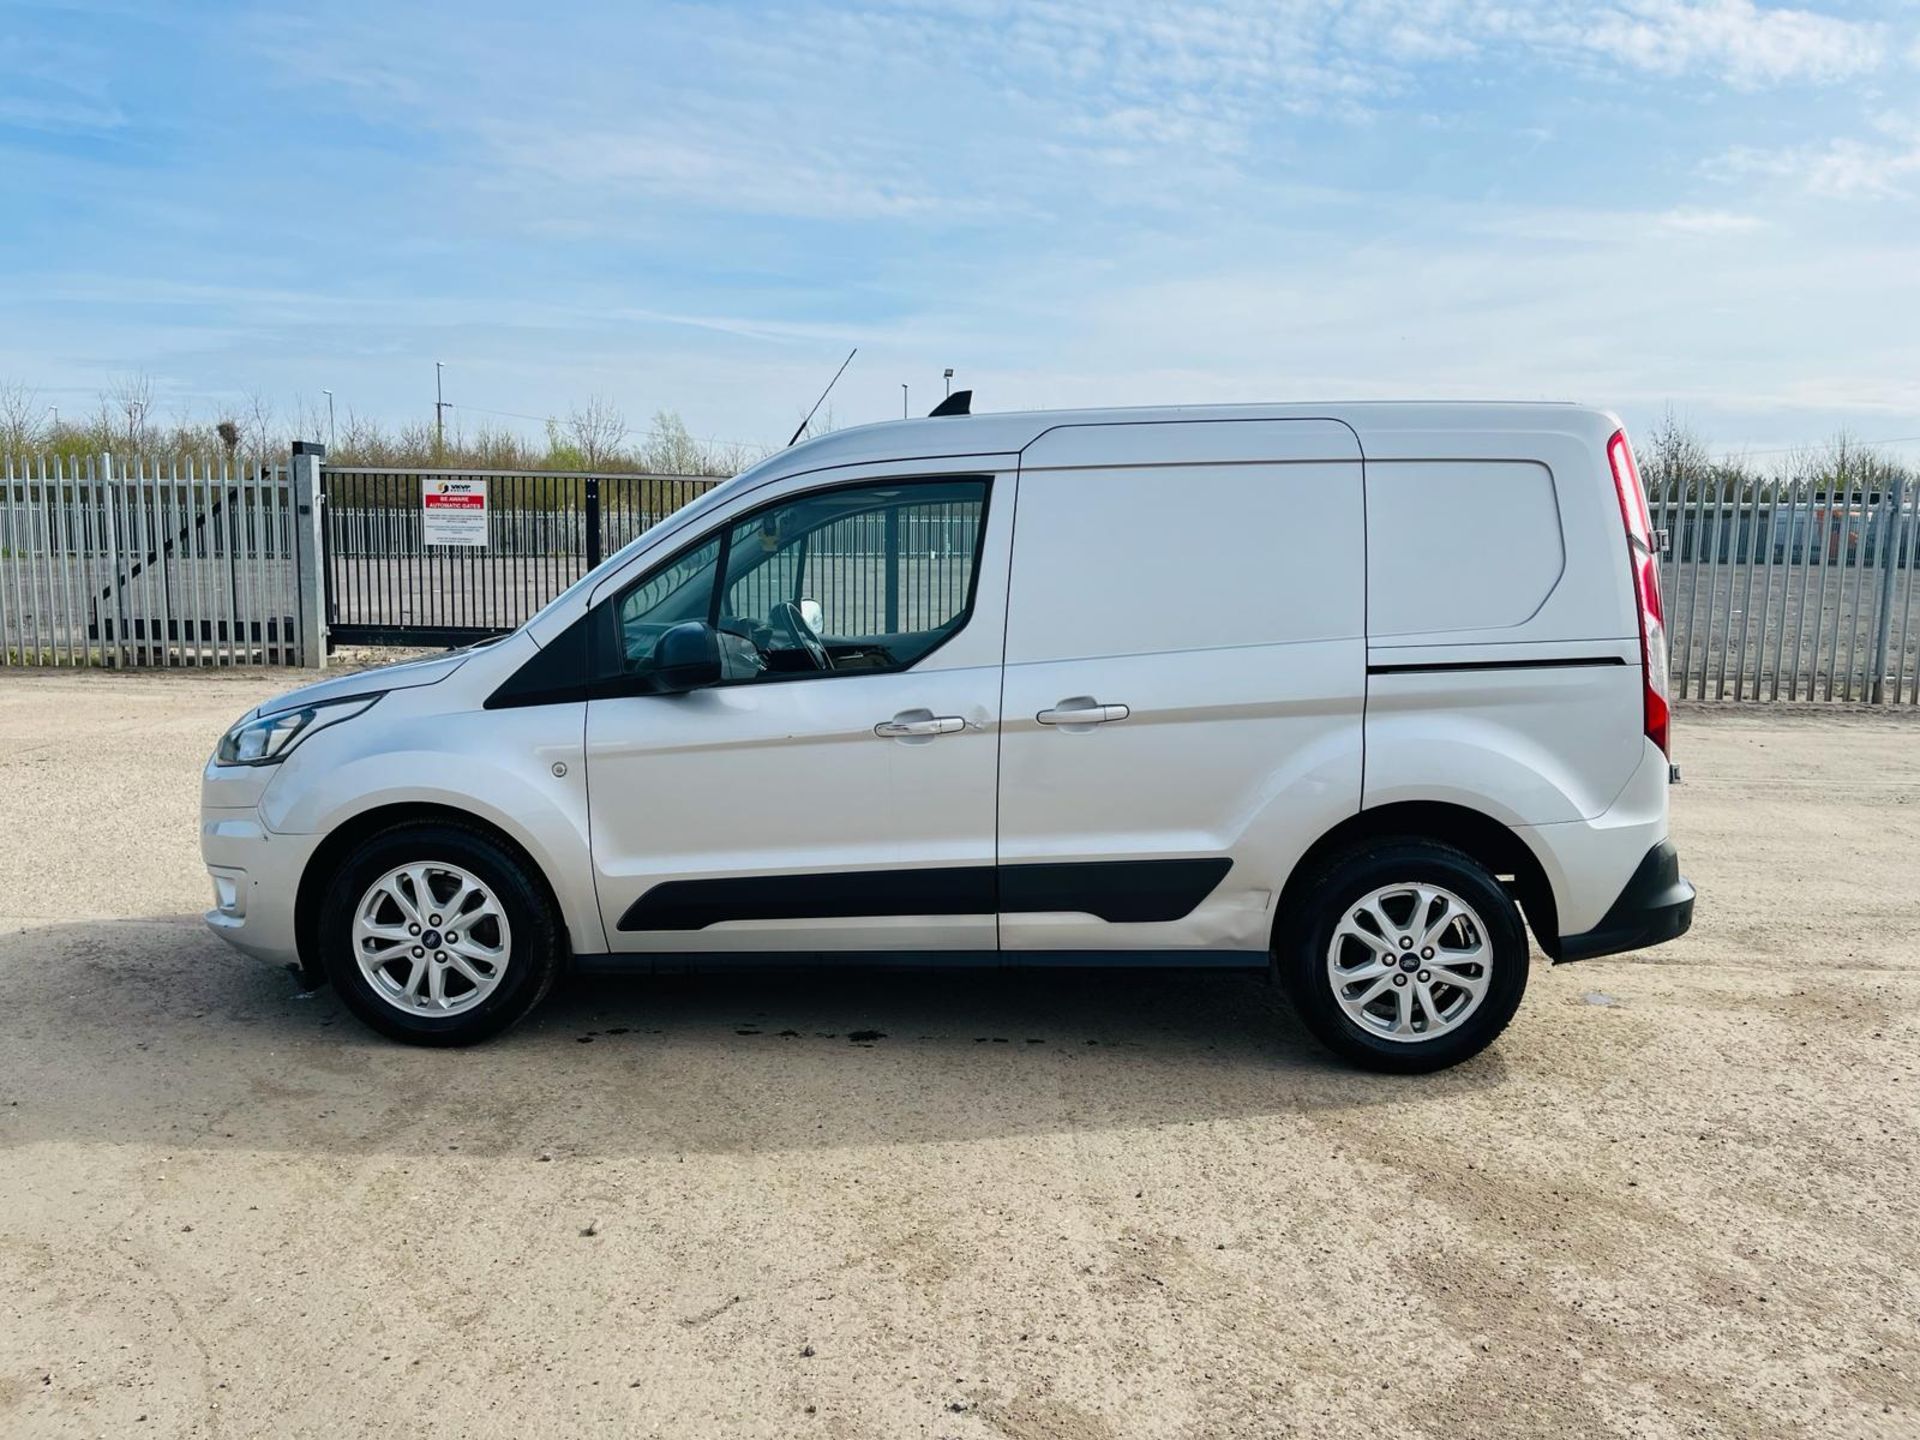 Ford Transit Connect 1.5 TDCI L1H1-2020 '70 Reg'- 1 Previous Owner -Alloy Wheels -Sat Nav - A/C - Image 4 of 28